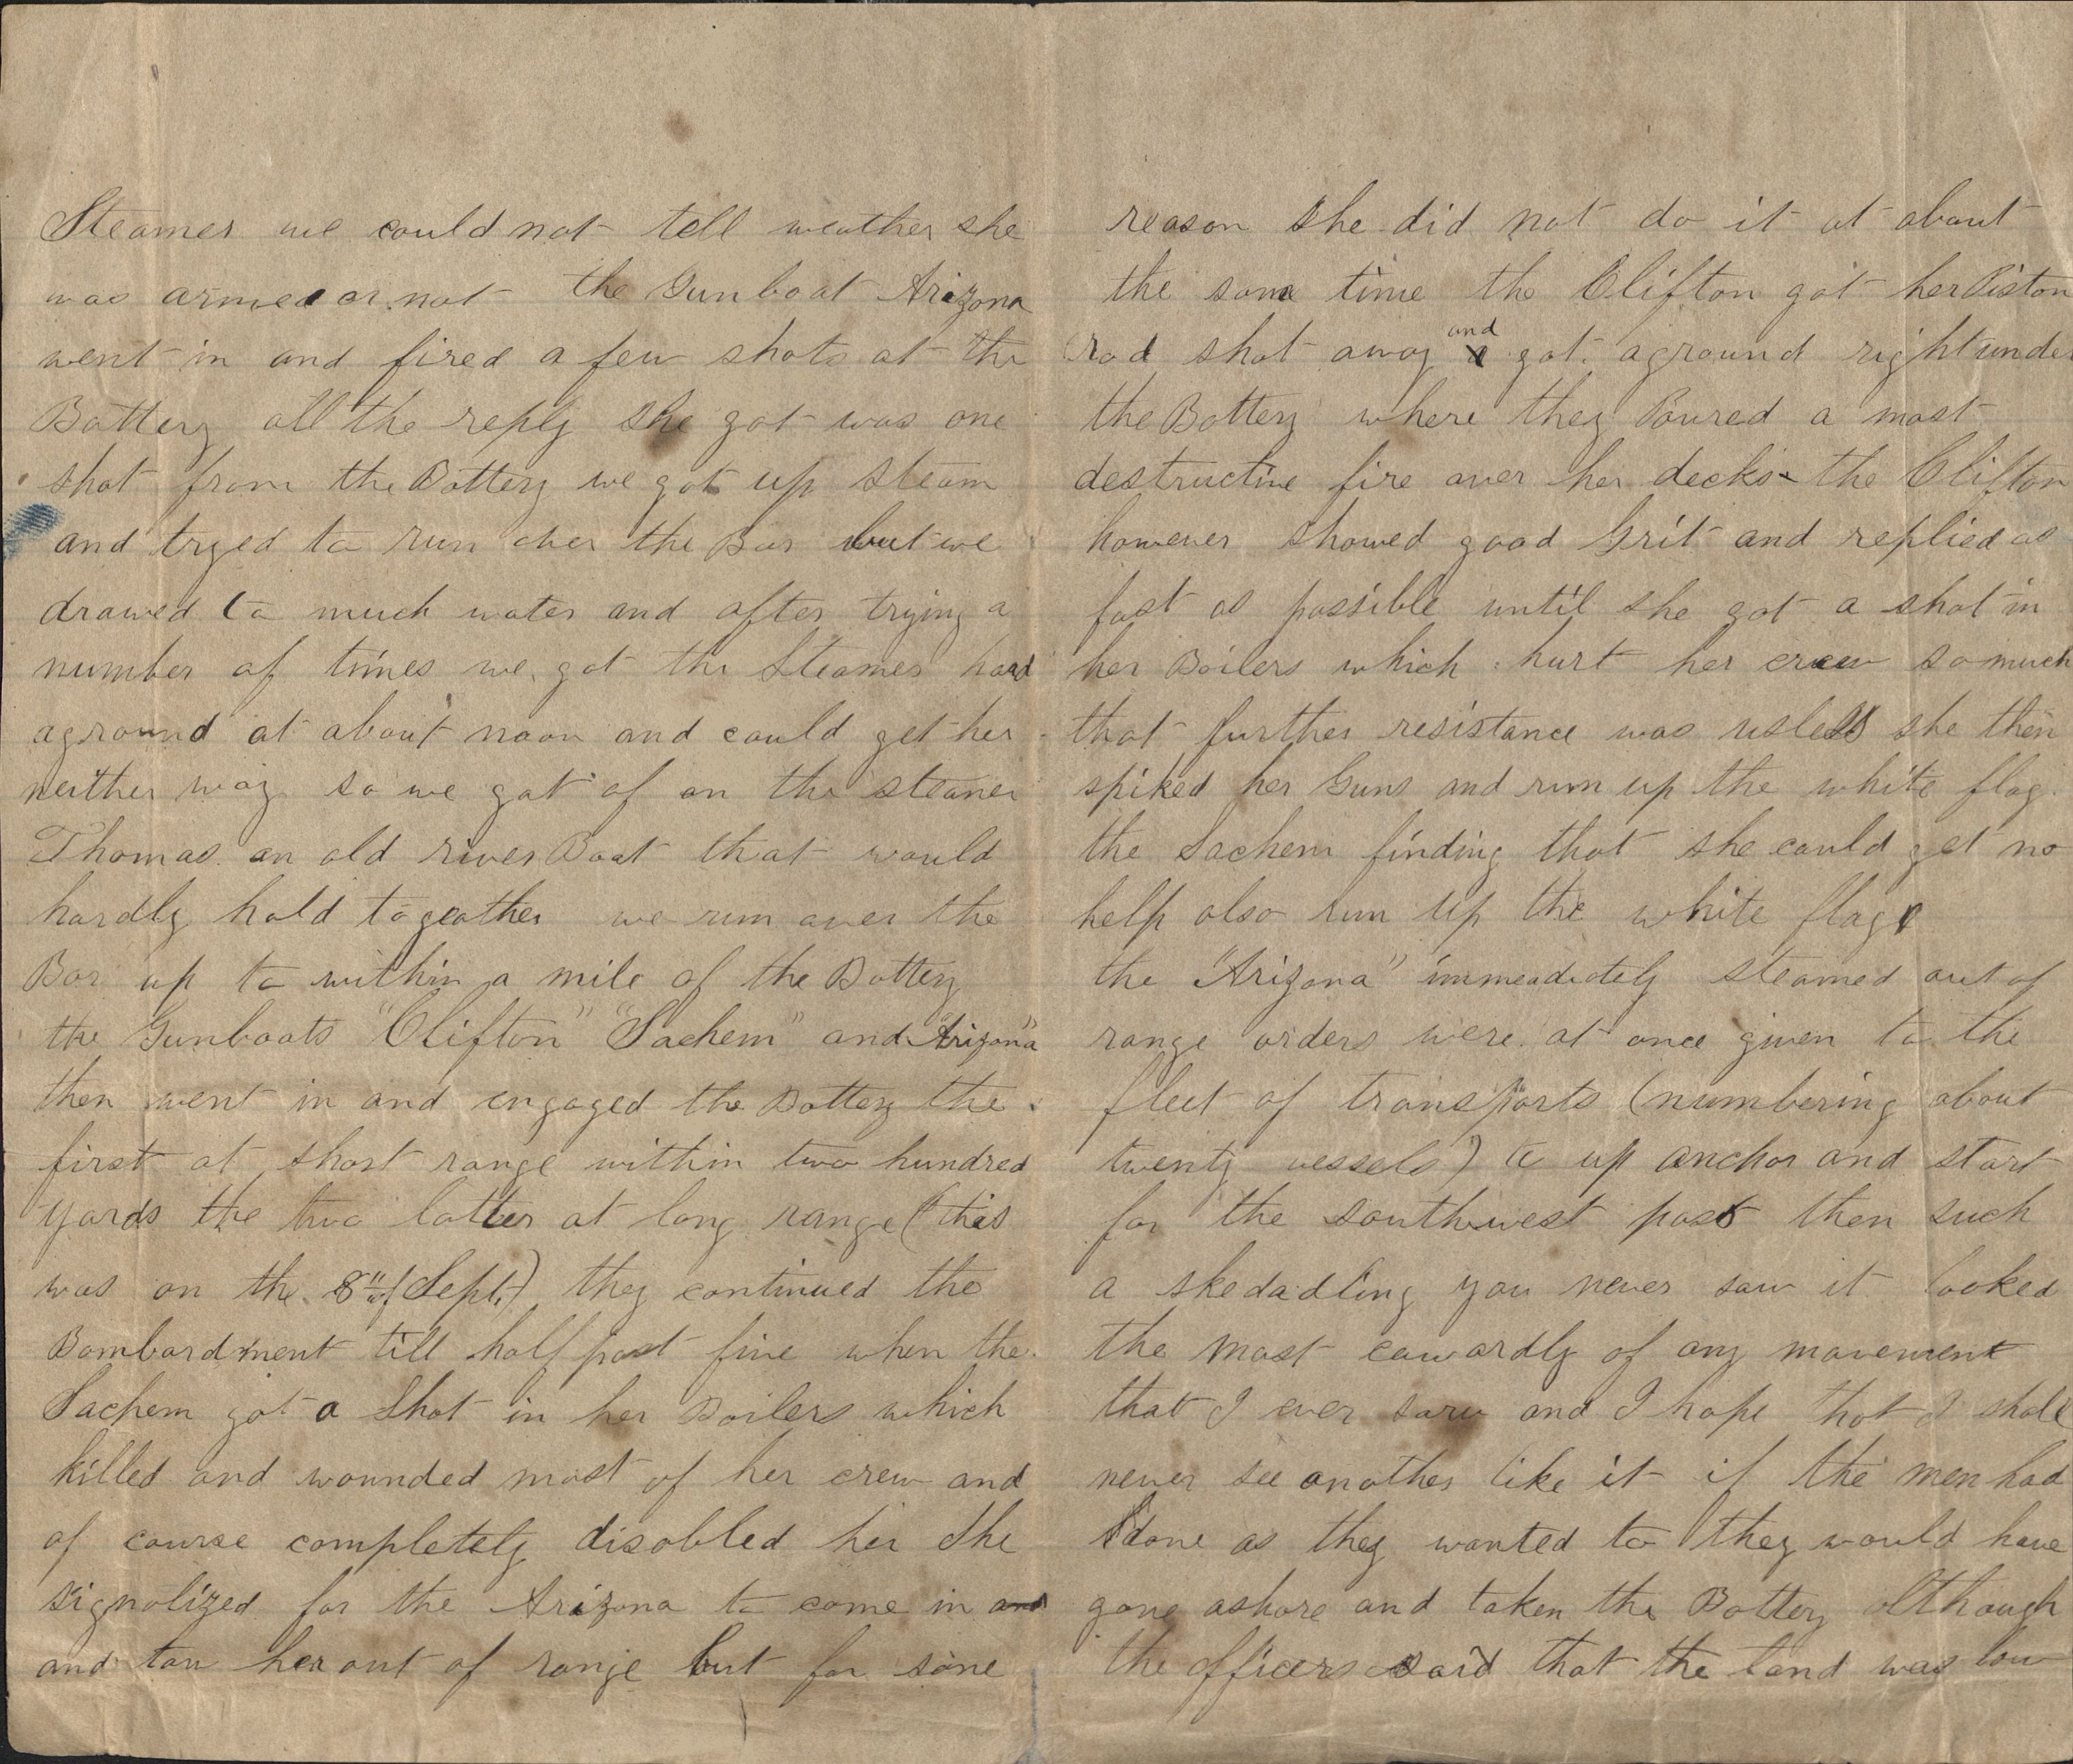 Civil War Letters Grapple with Gender, Interracial Marriage, and Working-Class Life